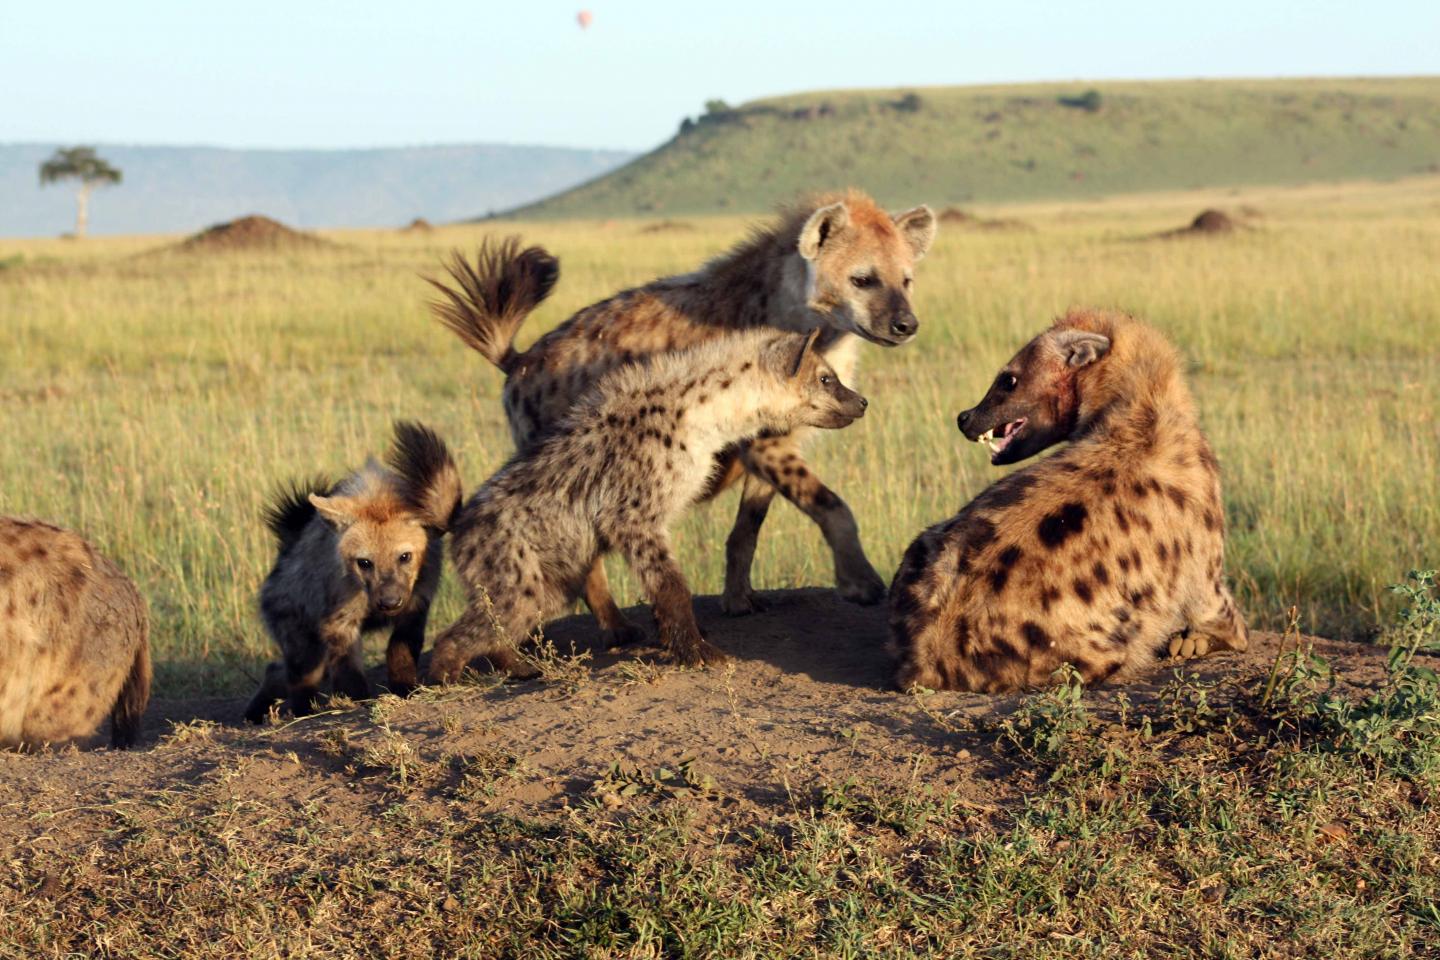 A Coalition of three Young Spotted Hyenas Elicits a Submissive Response from a Larger Groupmate